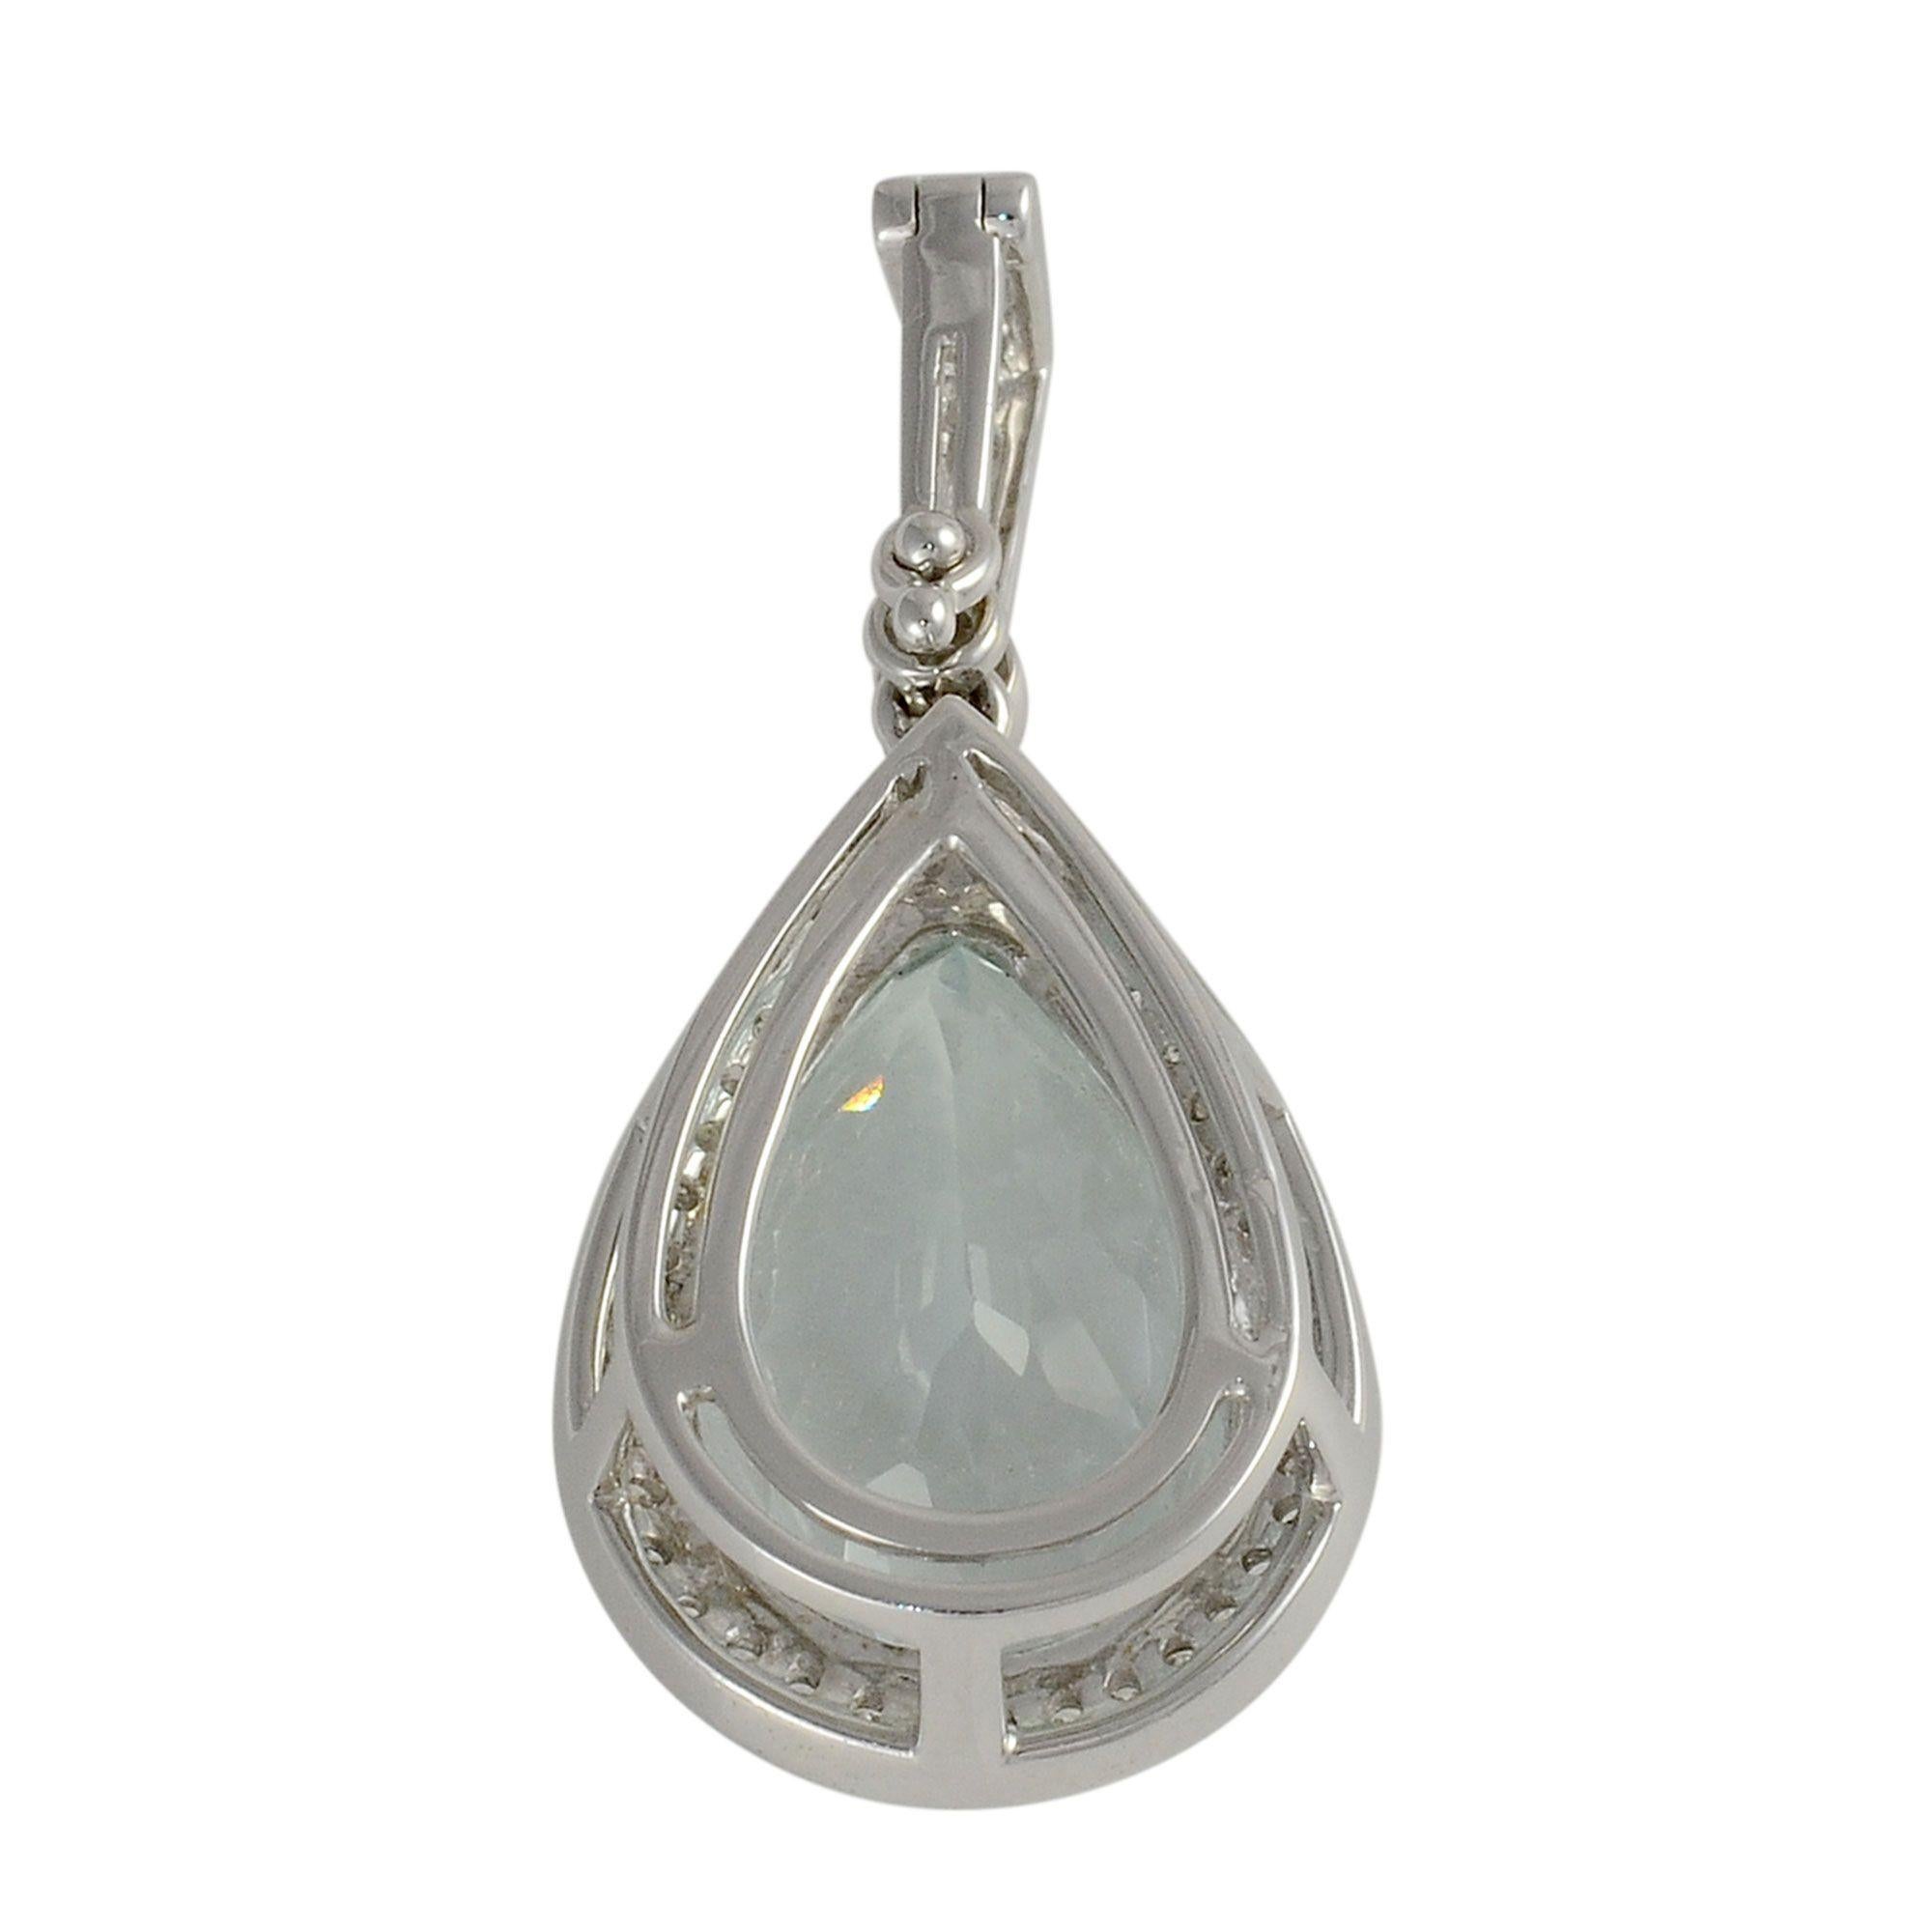 Estate 14K white gold aquamarine pendant enhancer featuring a pear cut aquamarine measuring 17mm x 11.4mm at approximately 8.38 carats. This aquamarine pendant is accented with approximately .43 CTW of diamonds. This aquamarine and diamond pendant